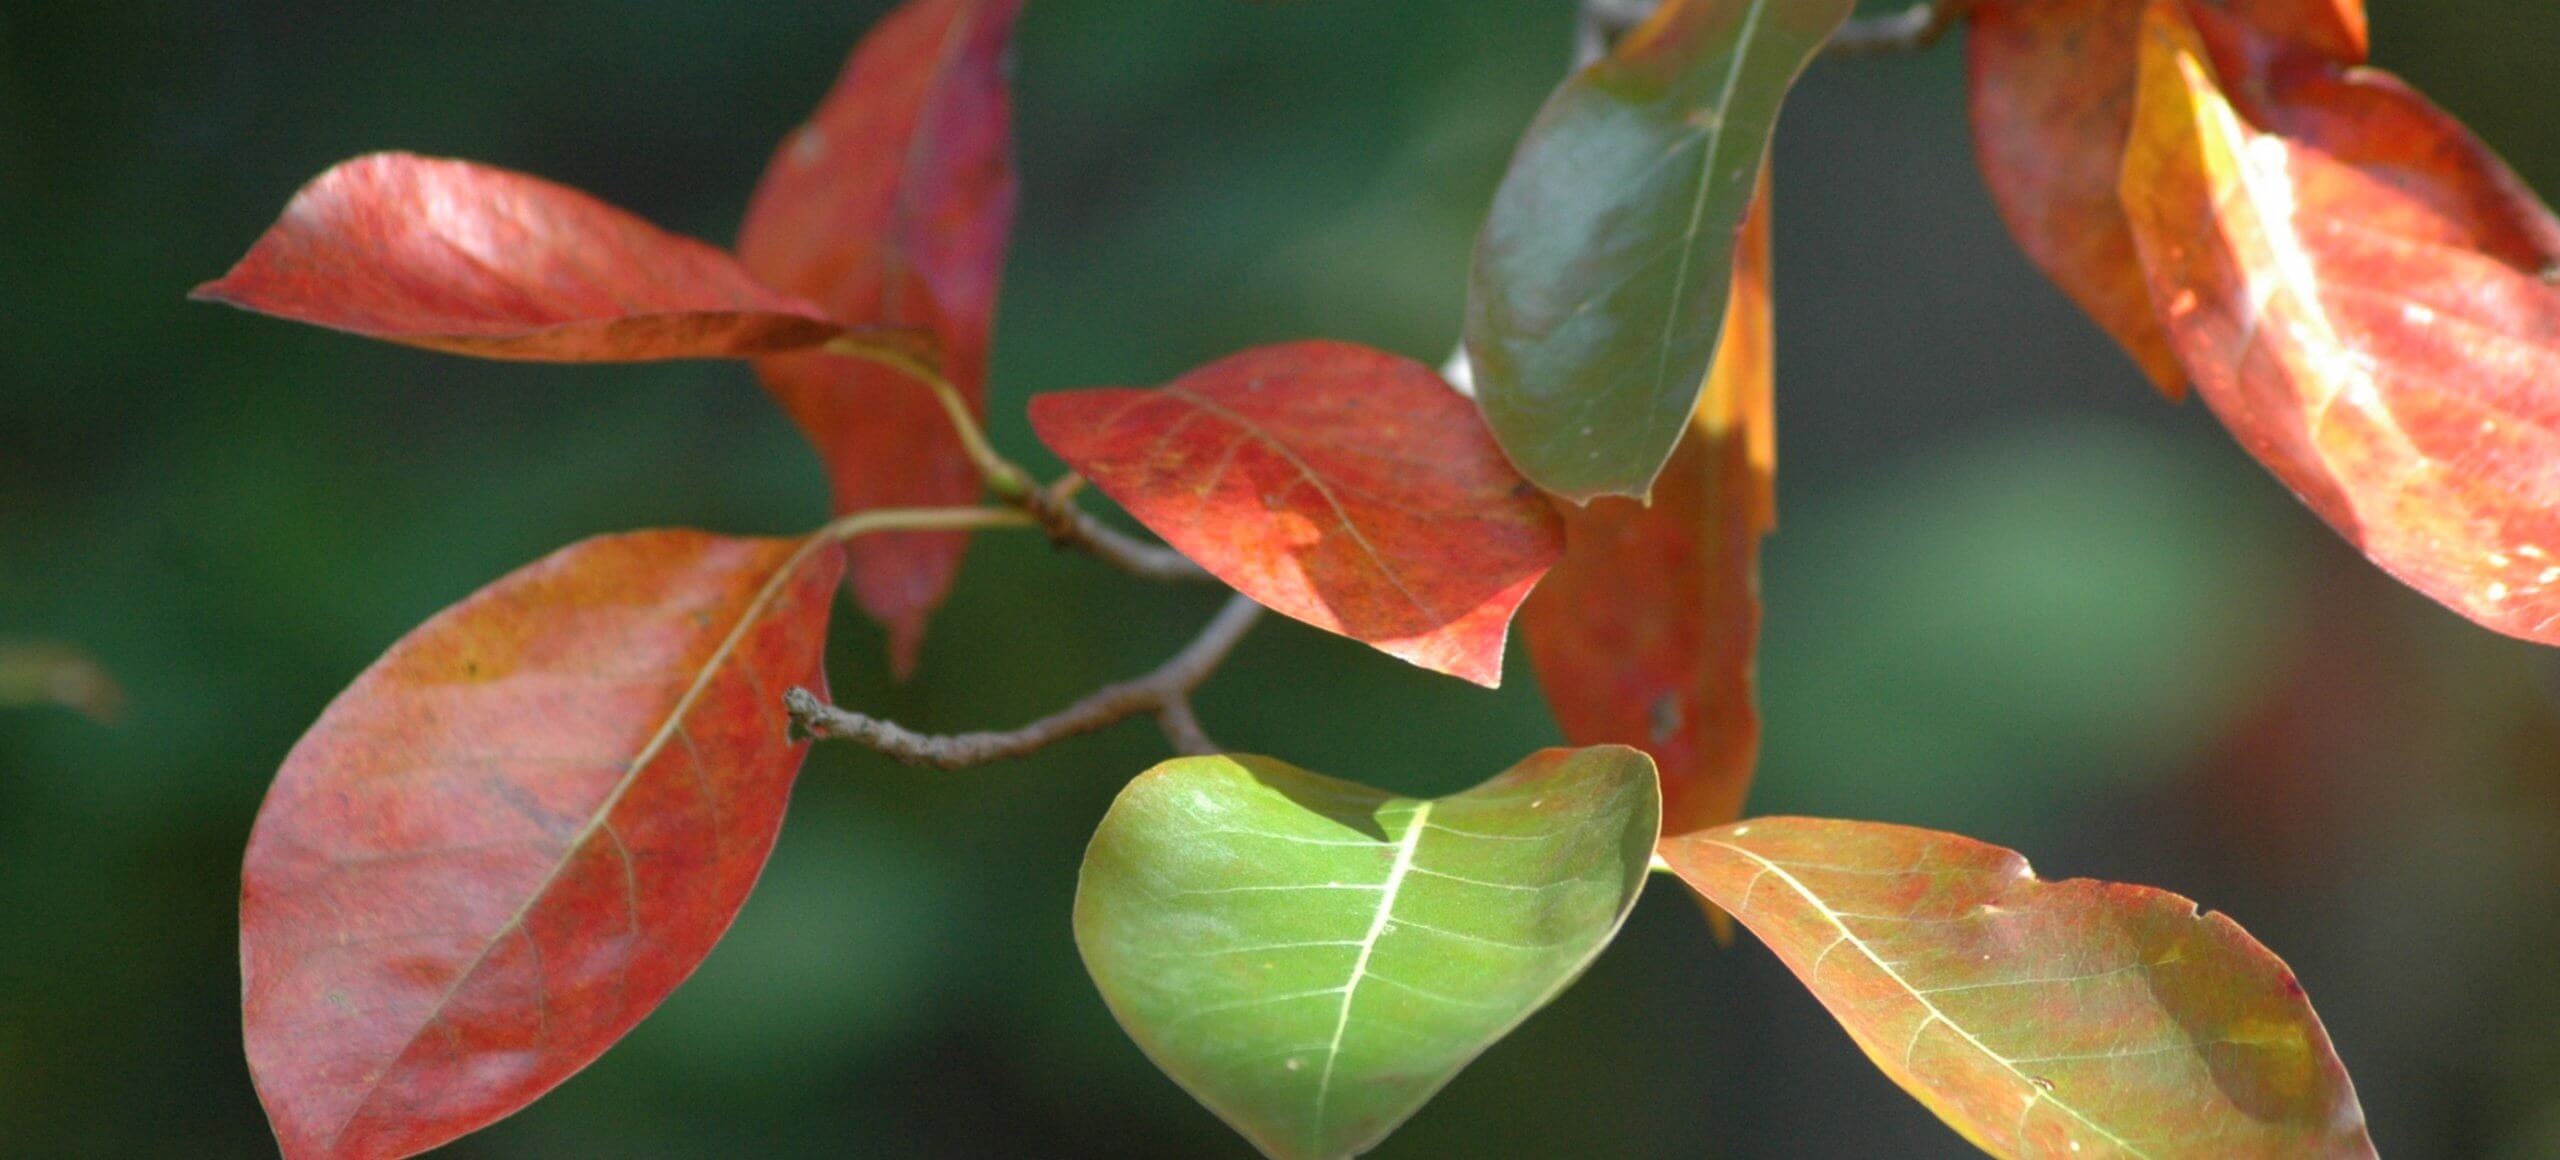 A close up shot of red leaves on a tree branch with a green background.